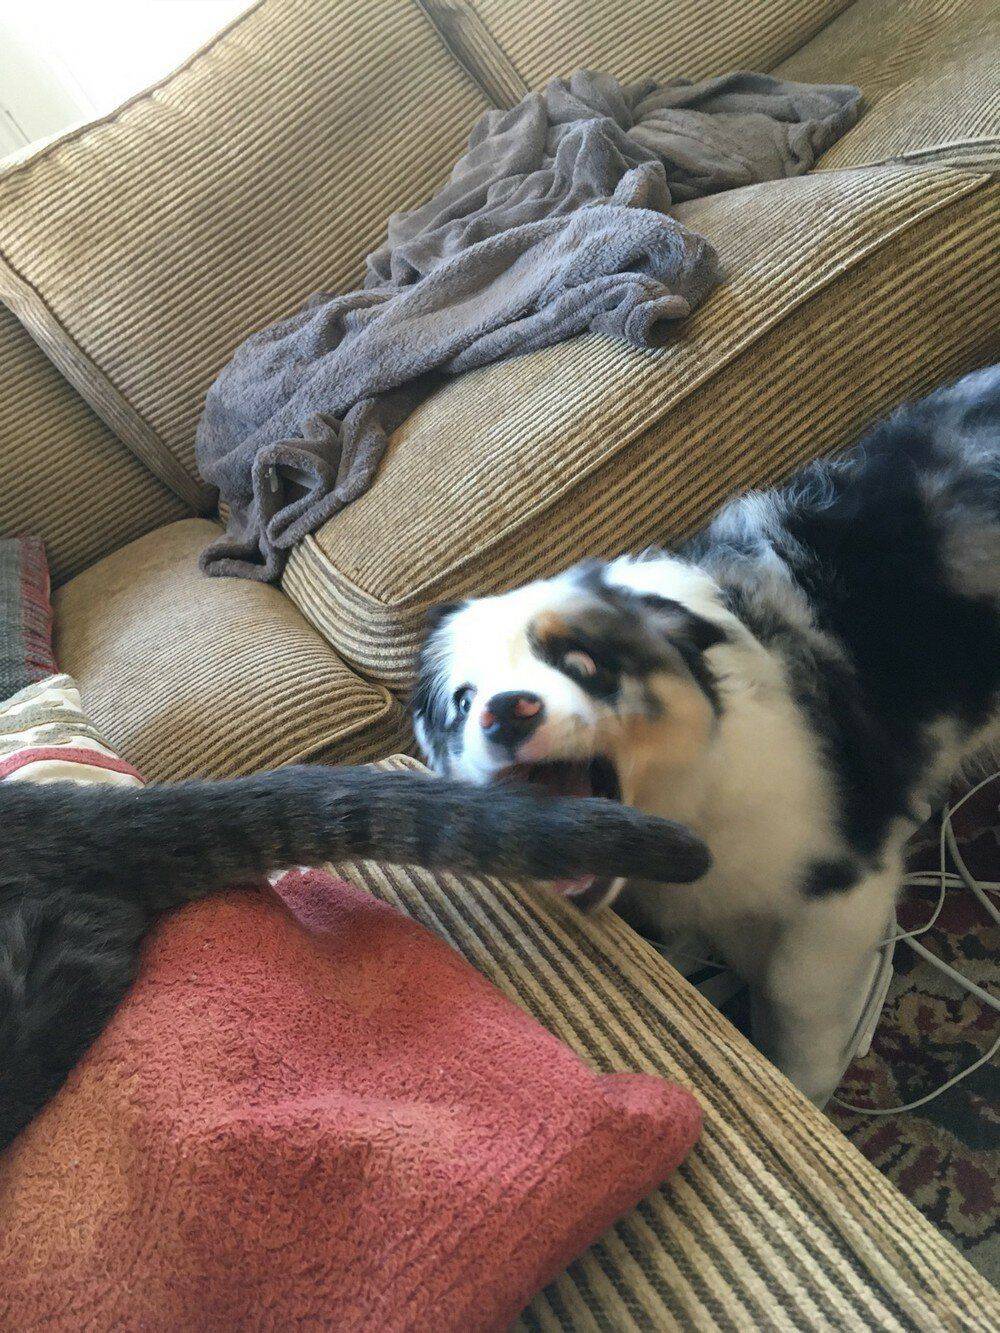 Humour - dog about to chomp on cat's tail